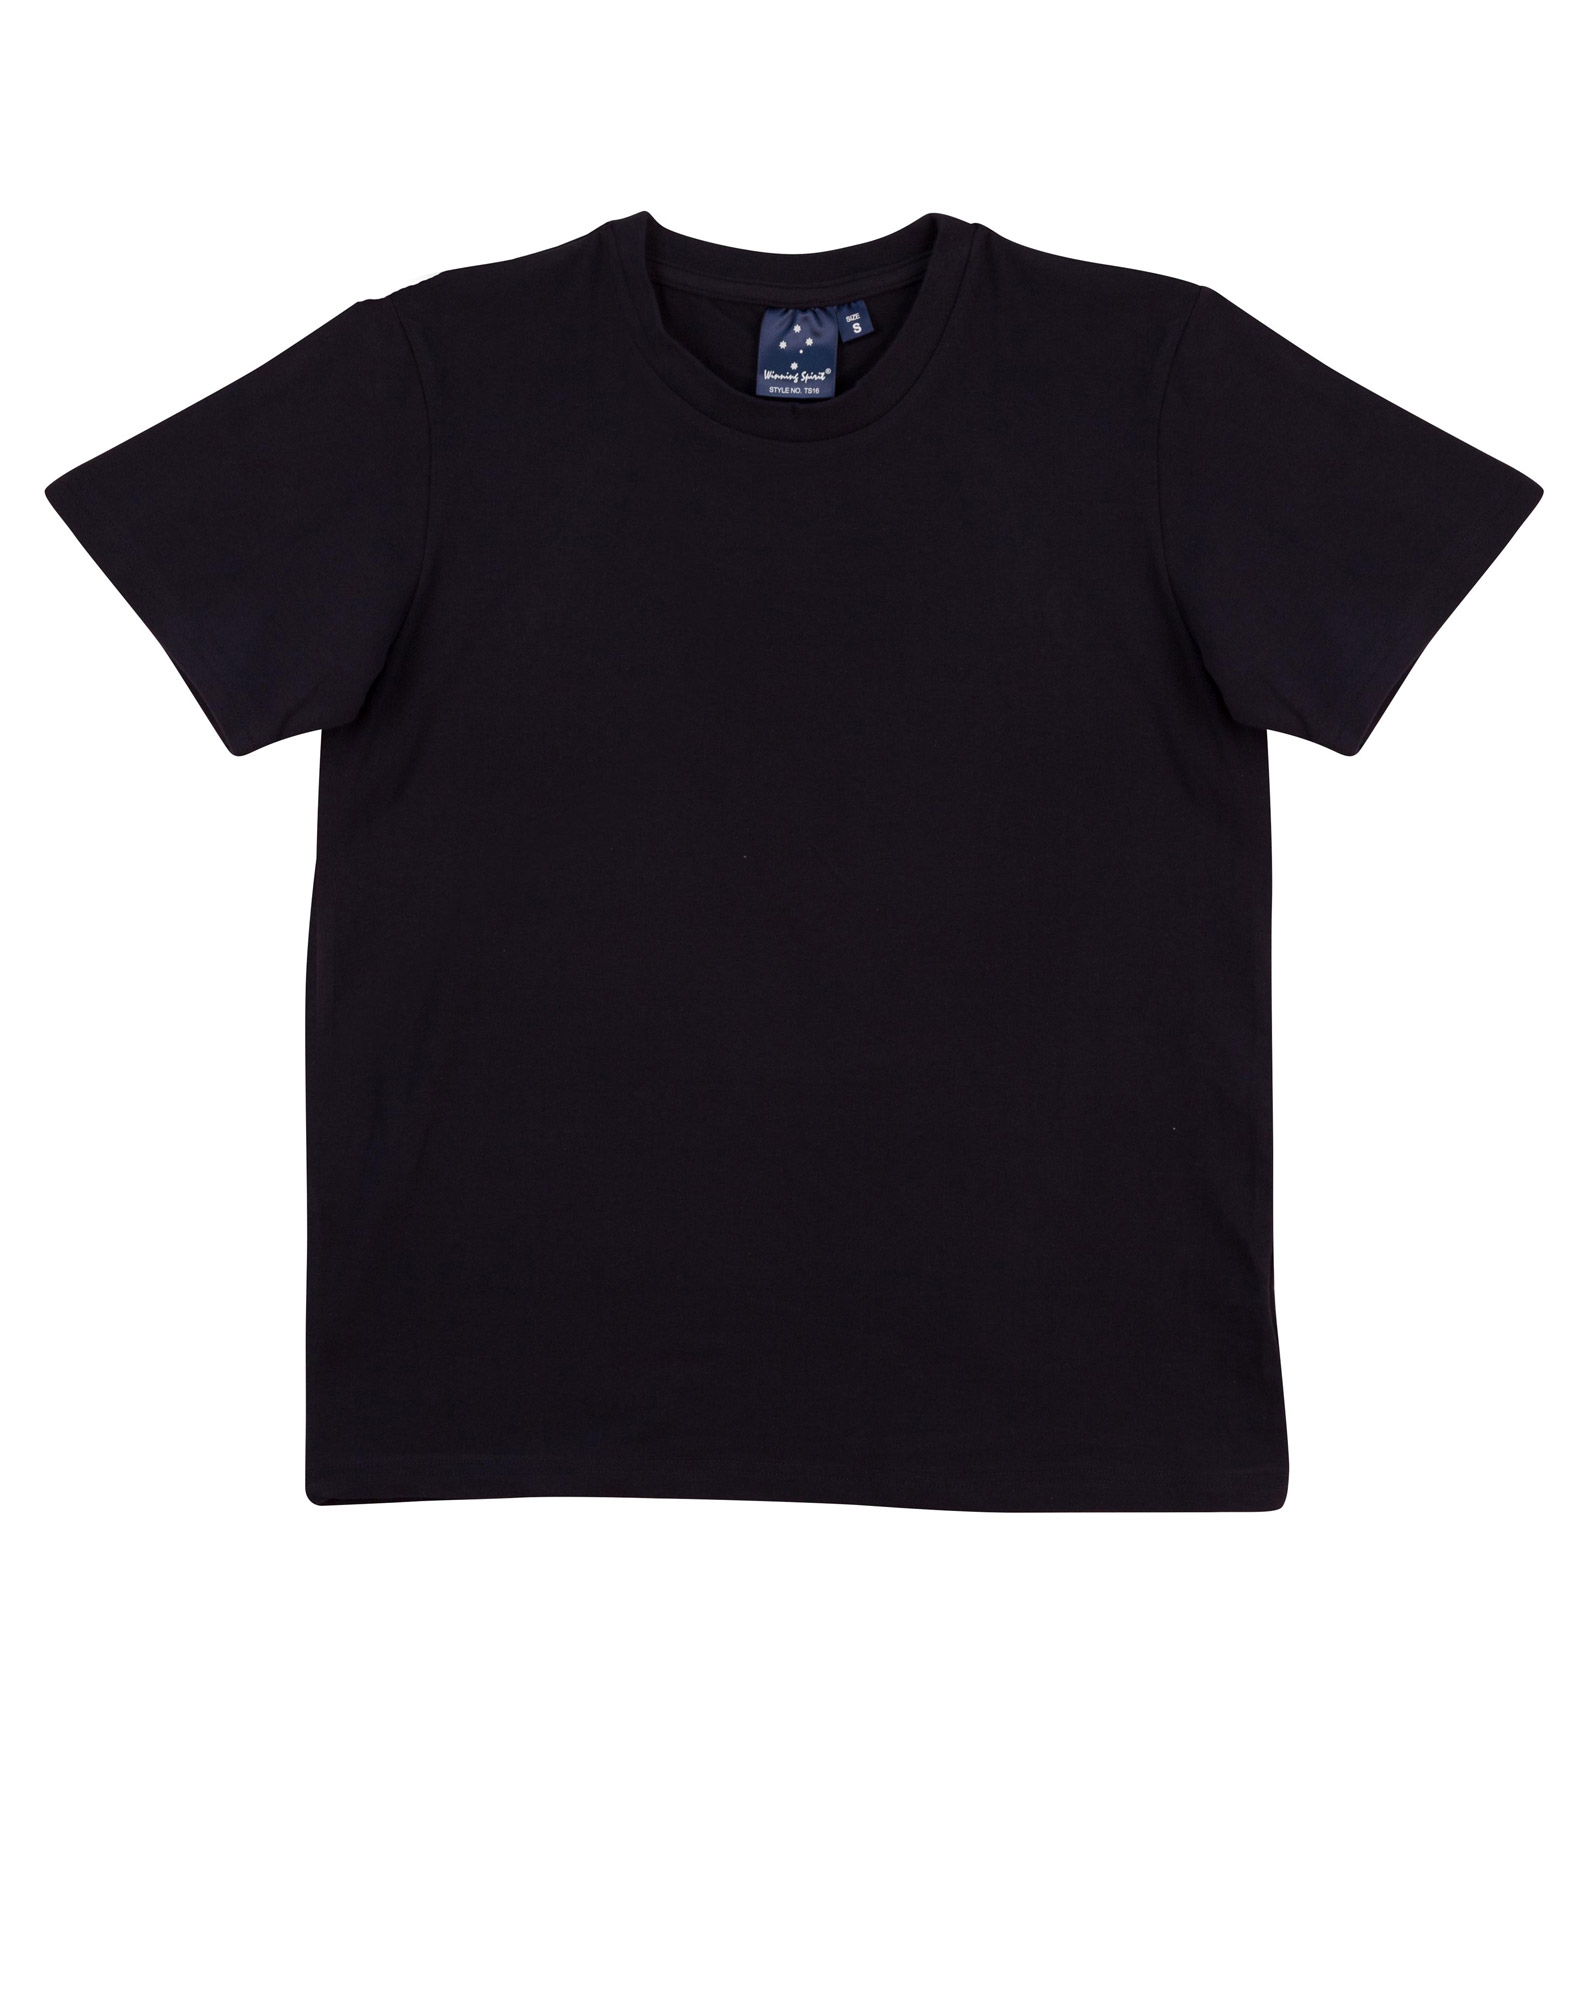 Custom (Navy) Mens Super Fitted Cotton Tee Shirts Online in Australia